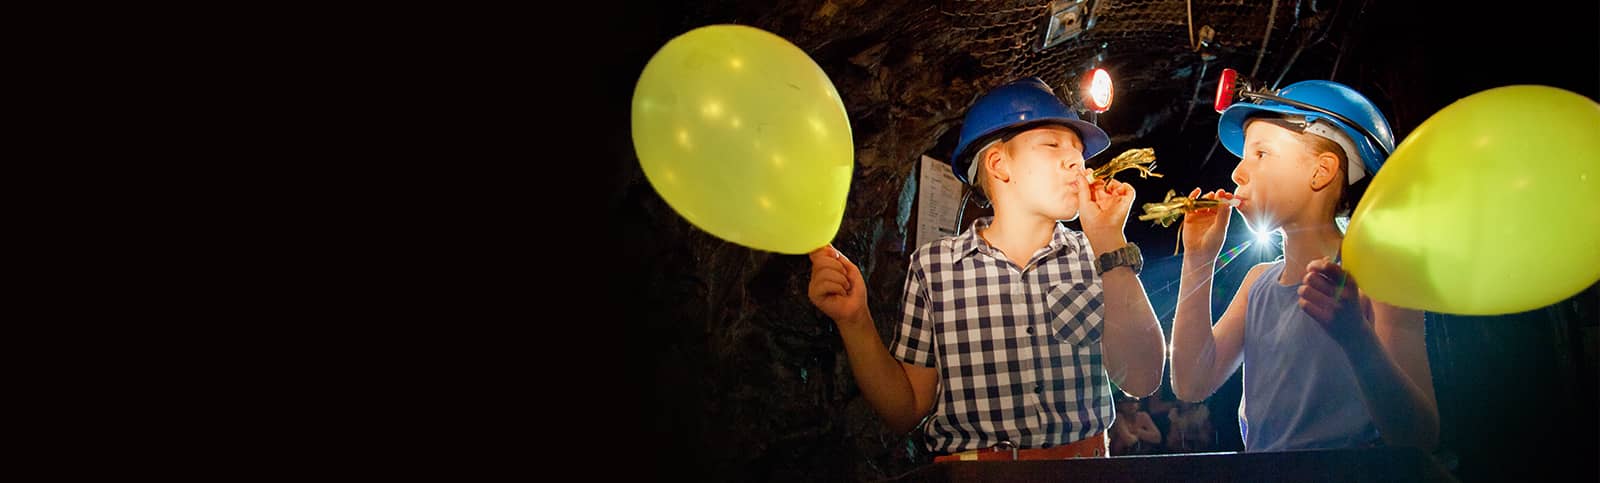 Kids wearing hard hats and holding balloons underground at a Birthday Party